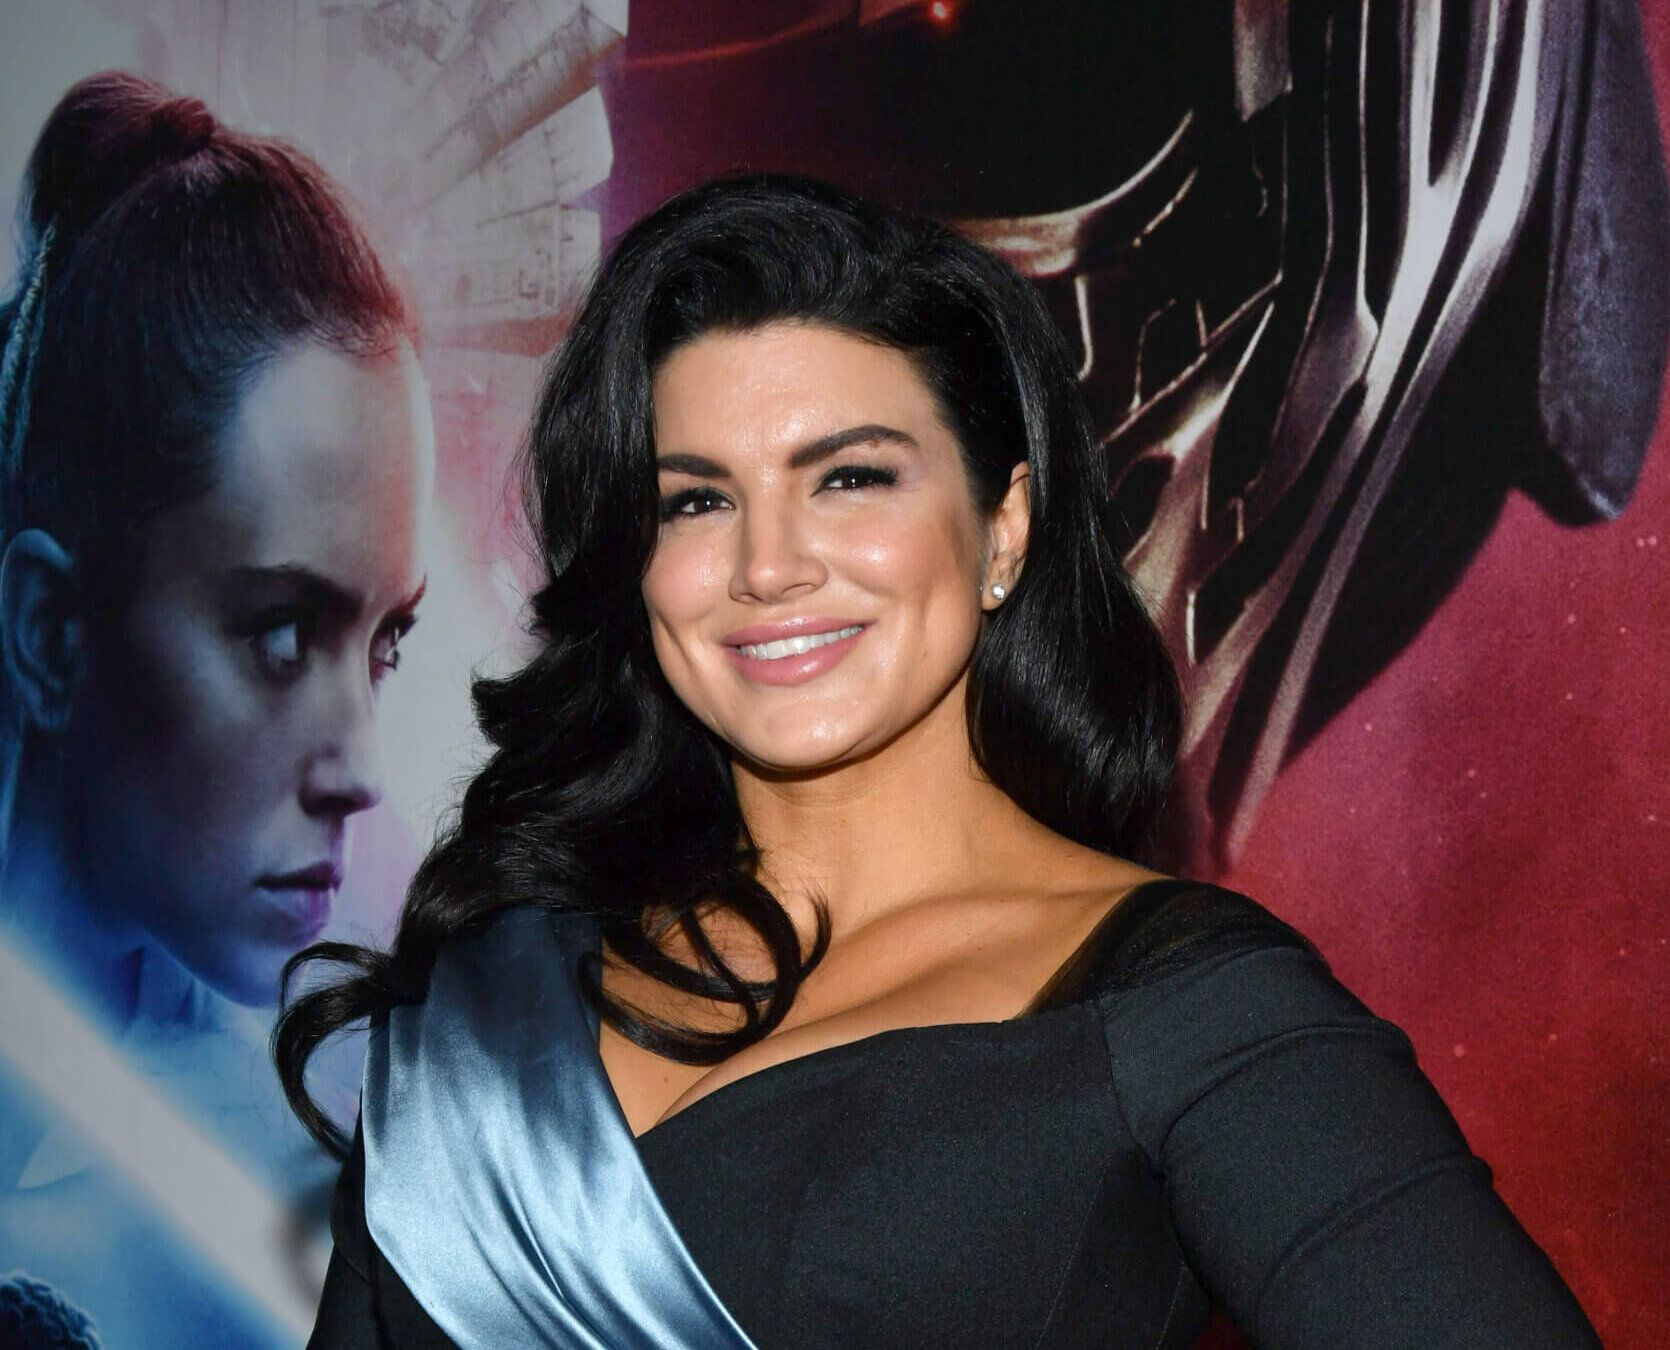 Gina Carano stars as Hattie McAllister, her first major role since Disney and Lucasfilm ended their collaboration with her.